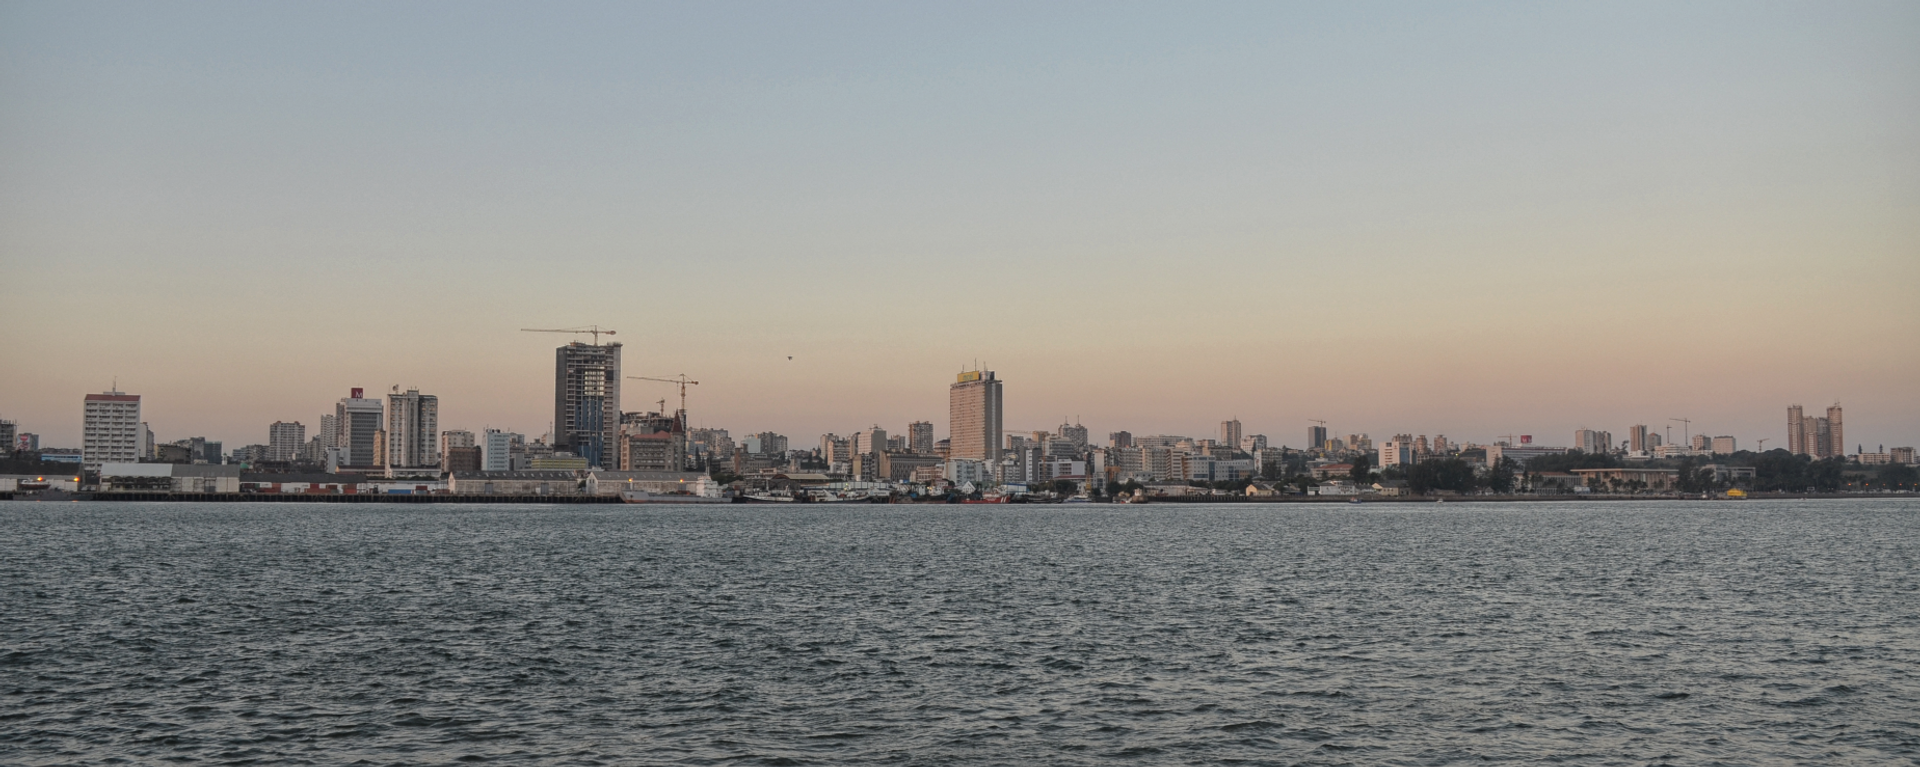 A view of the city of Maputo from the ferry to Katembe, 2014 - Sputnik International, 1920, 23.08.2022